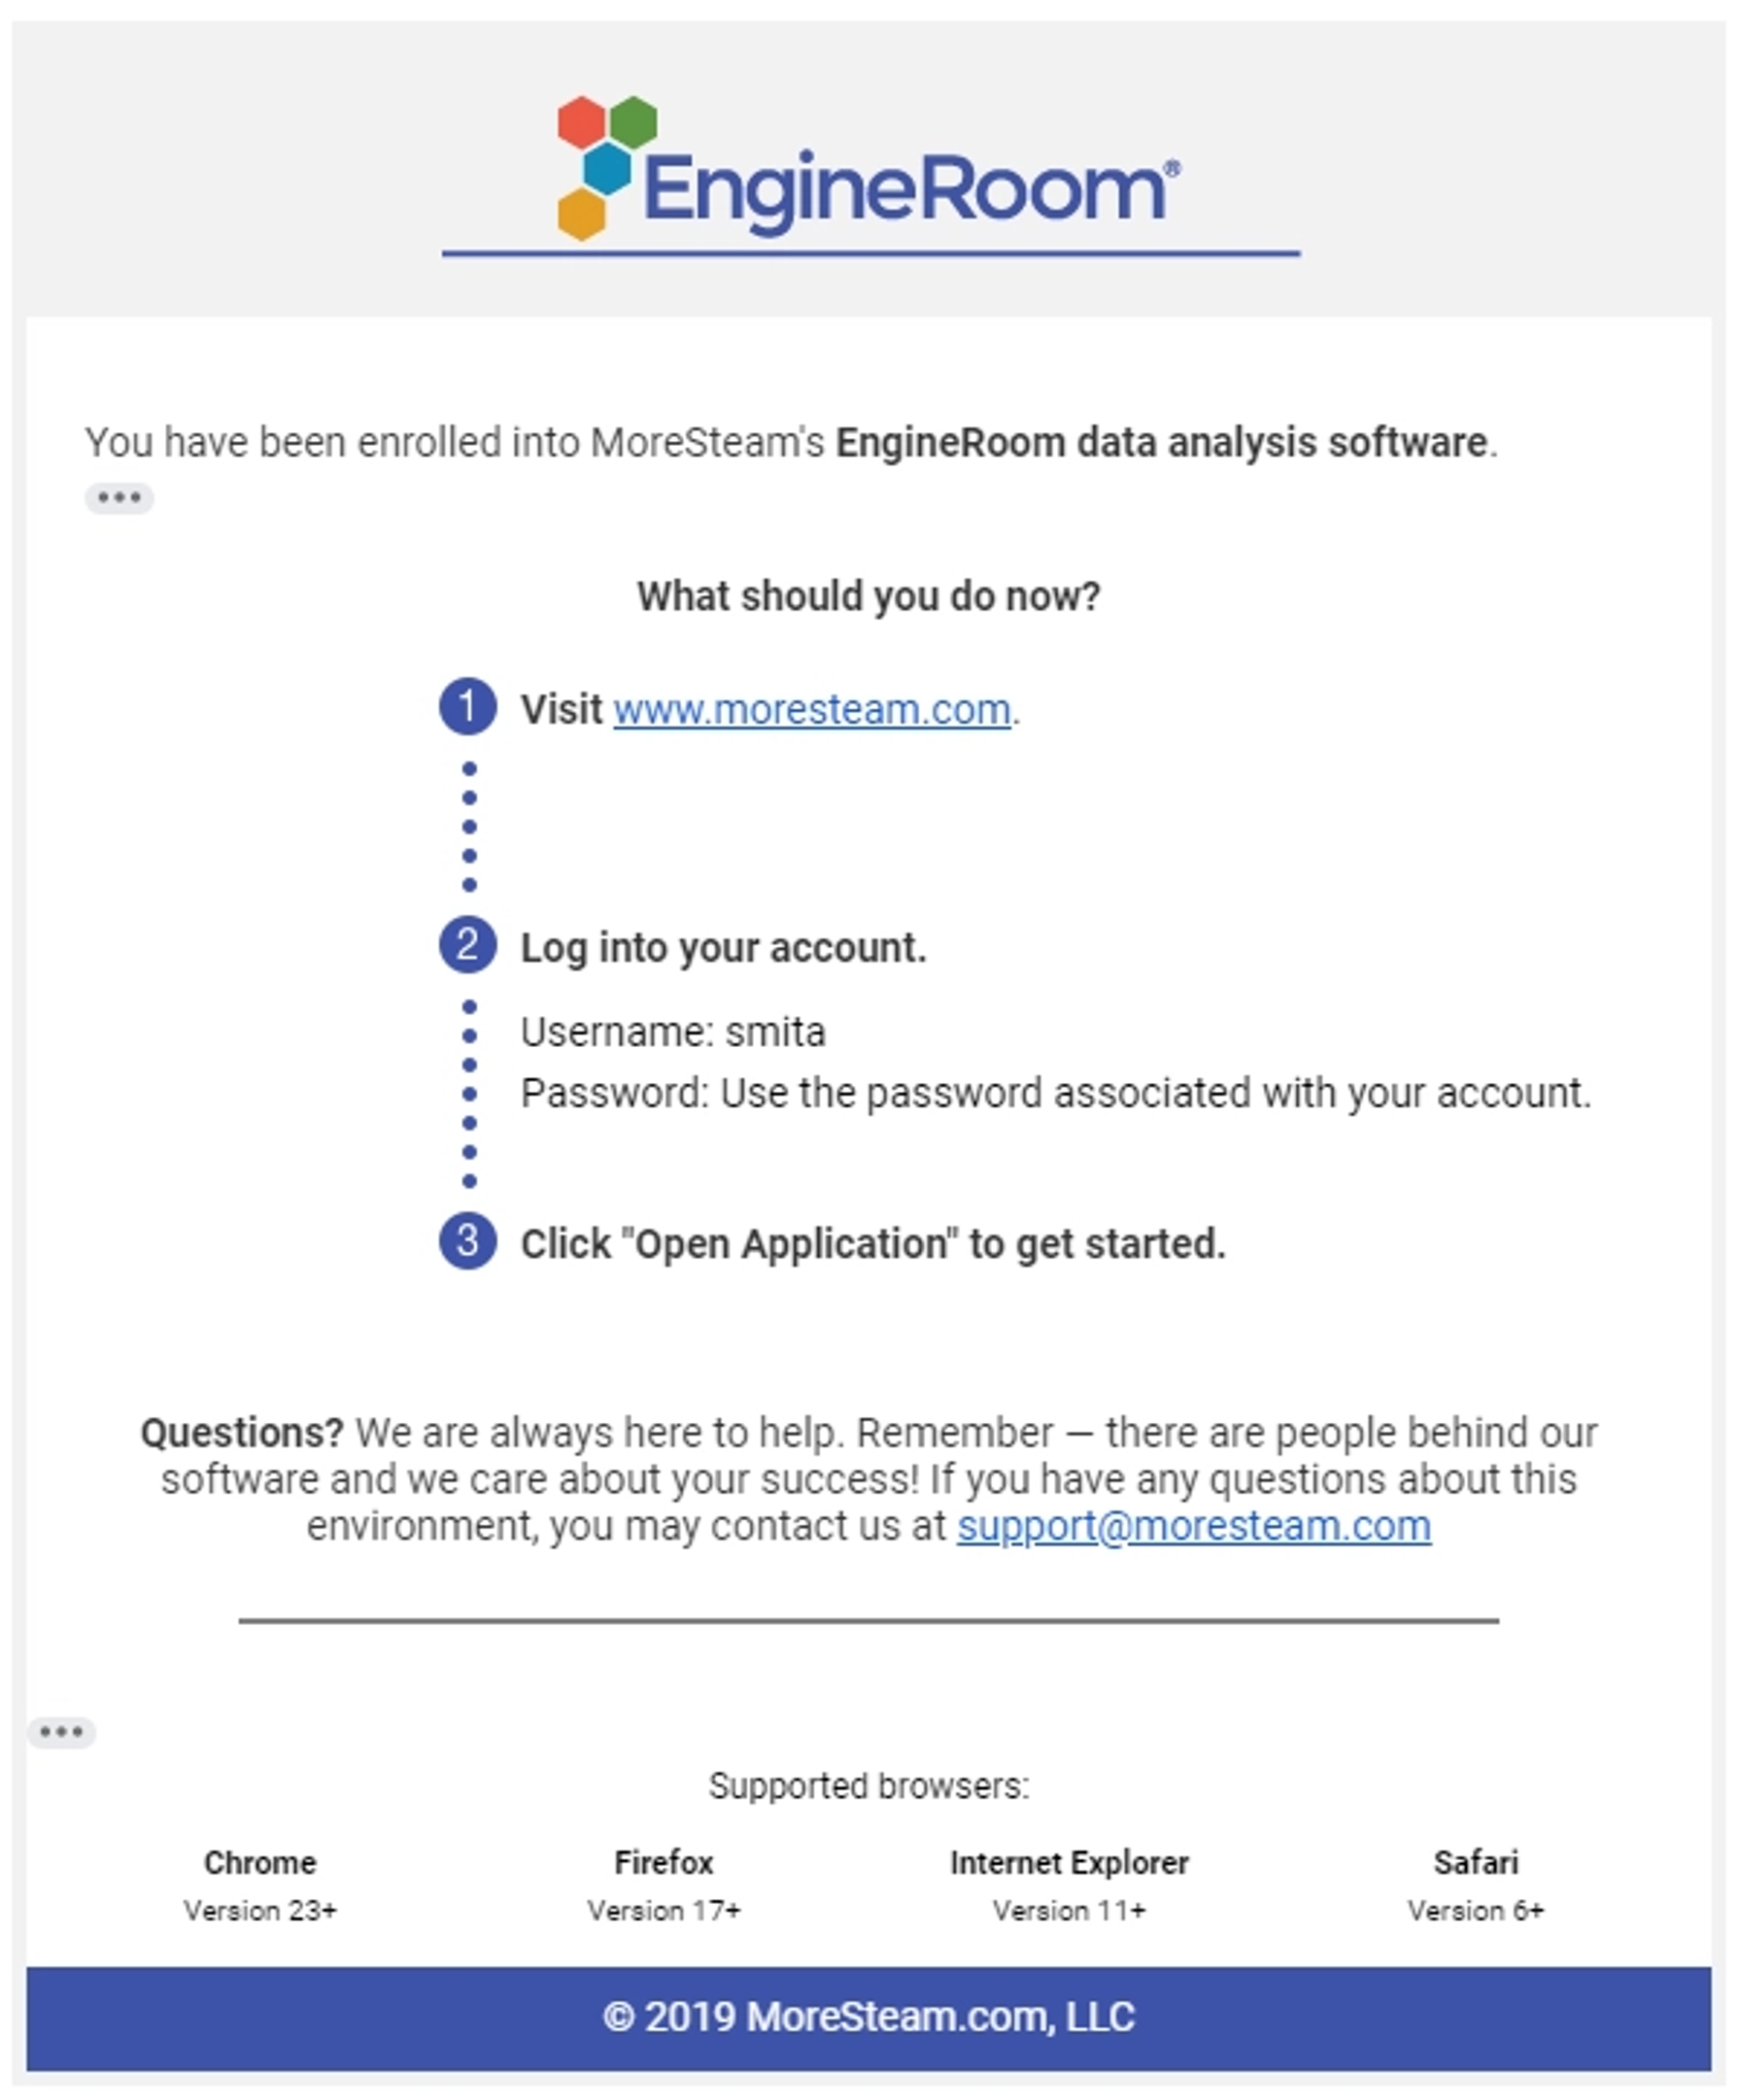 Welcome email sent to user after successfully signing up for EngineRoom